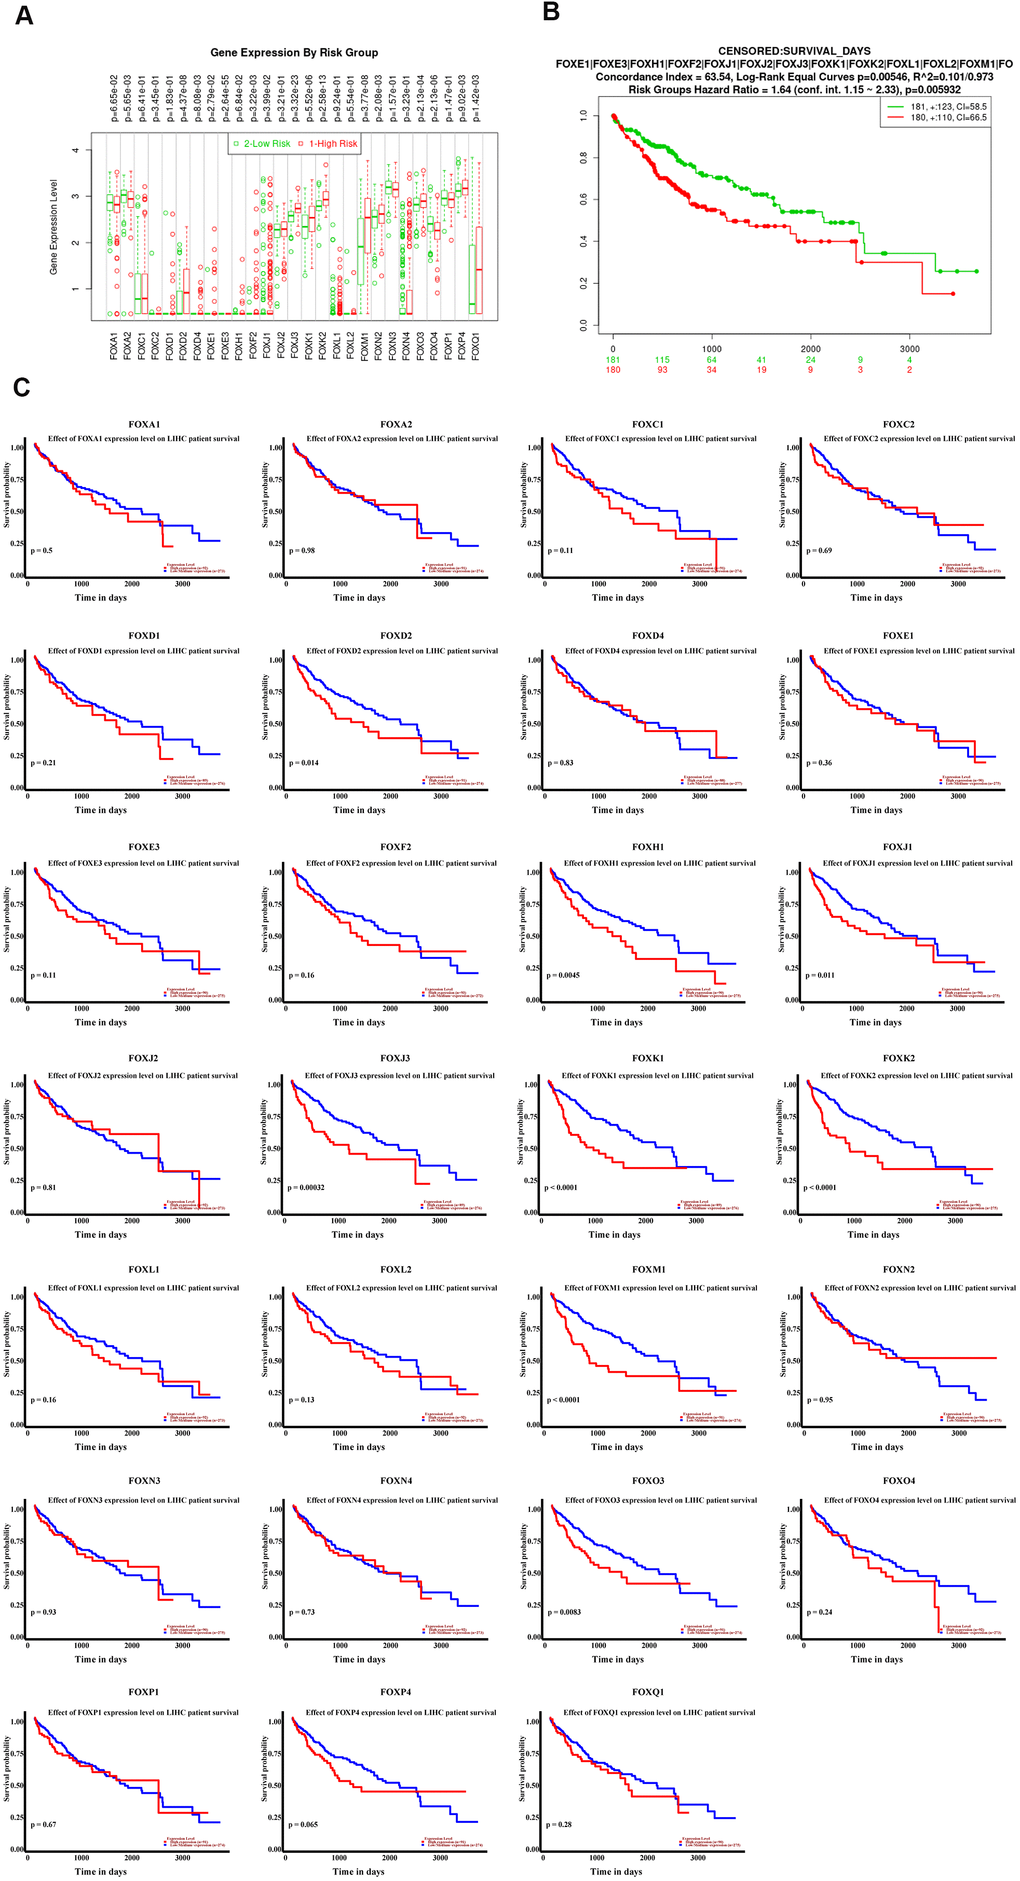 The expression levels of FOX proteins were independent predictors for overall survival of HCC patients. (A) The Box plots of individual FOX protein in low (green) and high (red) risk groups of TCGA-LIHC patients. (B) Cox overall survival analysis in SurvExpress showed that HCC patients with high expression levels of FOX proteins had shorter overall survival. (C) The association between Individual FOX protein expression level with overall survival of HCC. *P**P***P